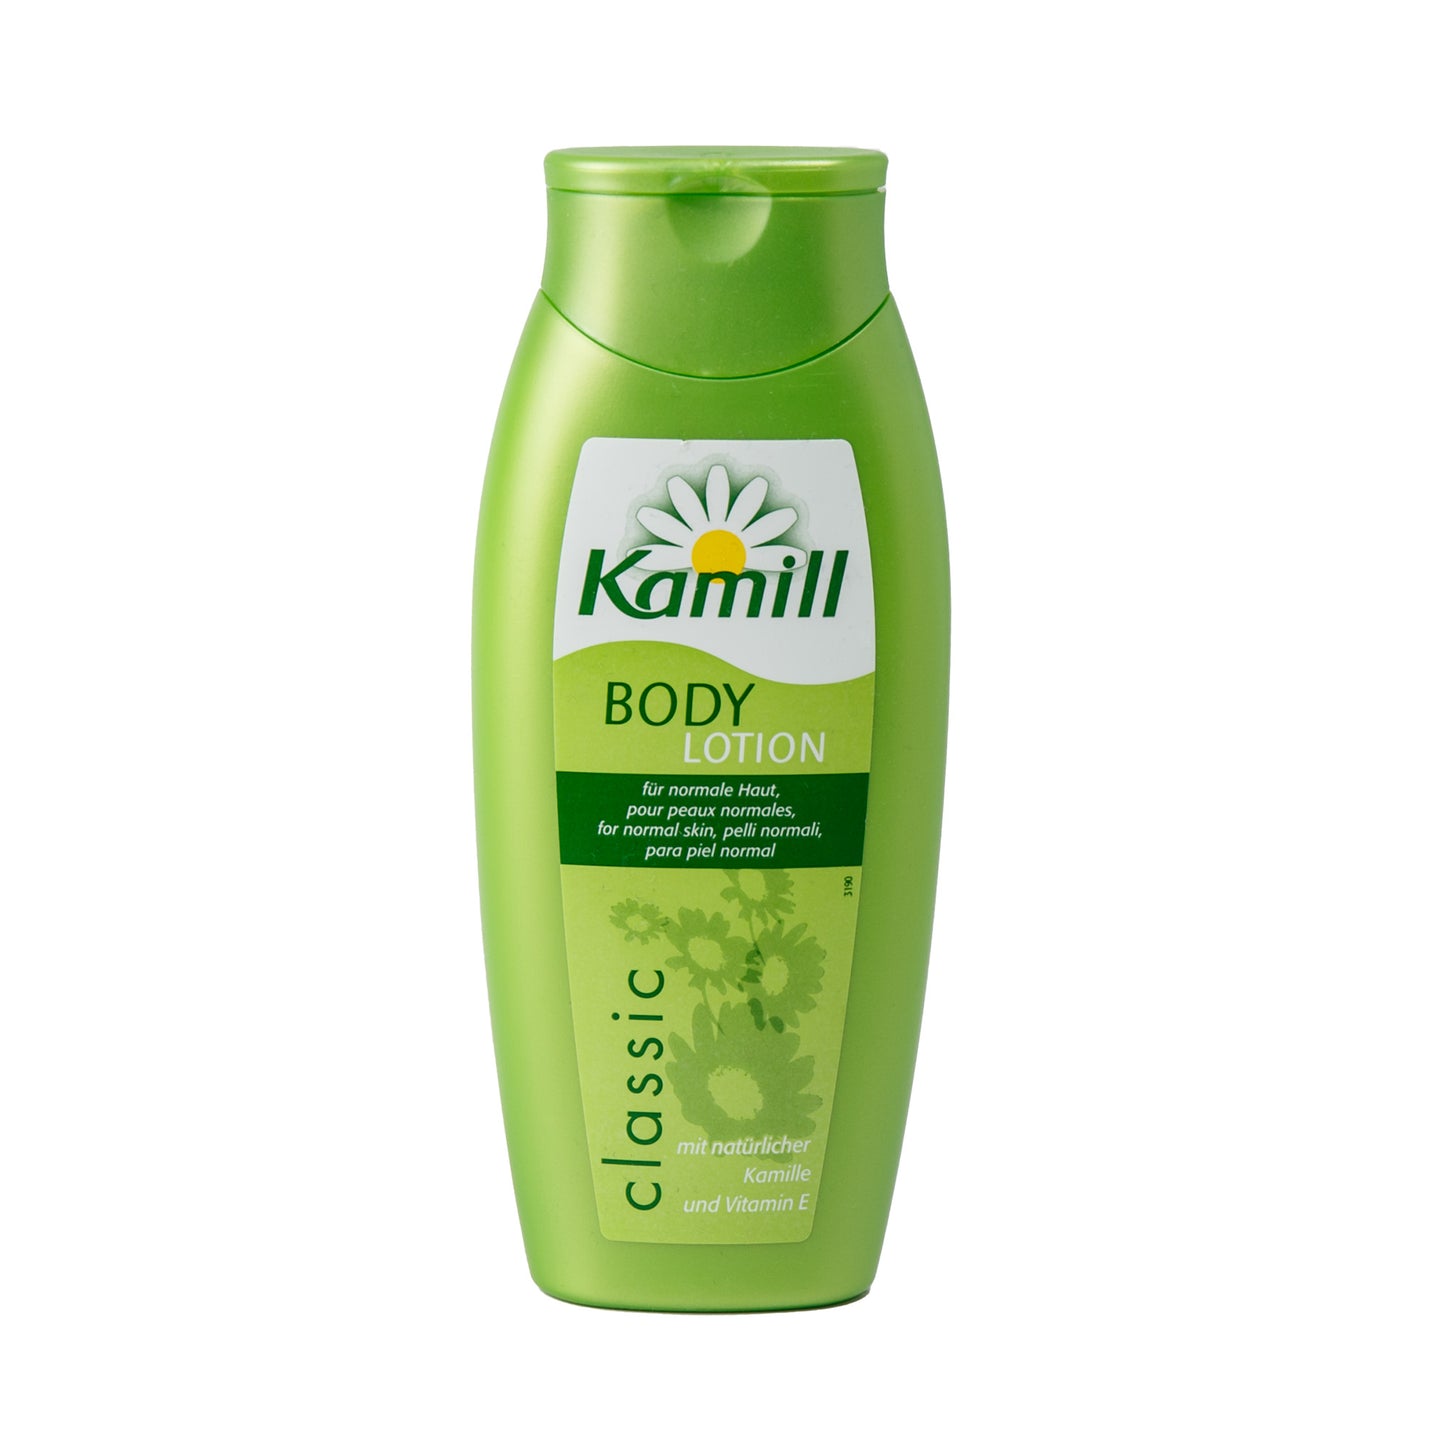 Primary image of Kamill Classic Body Lotion